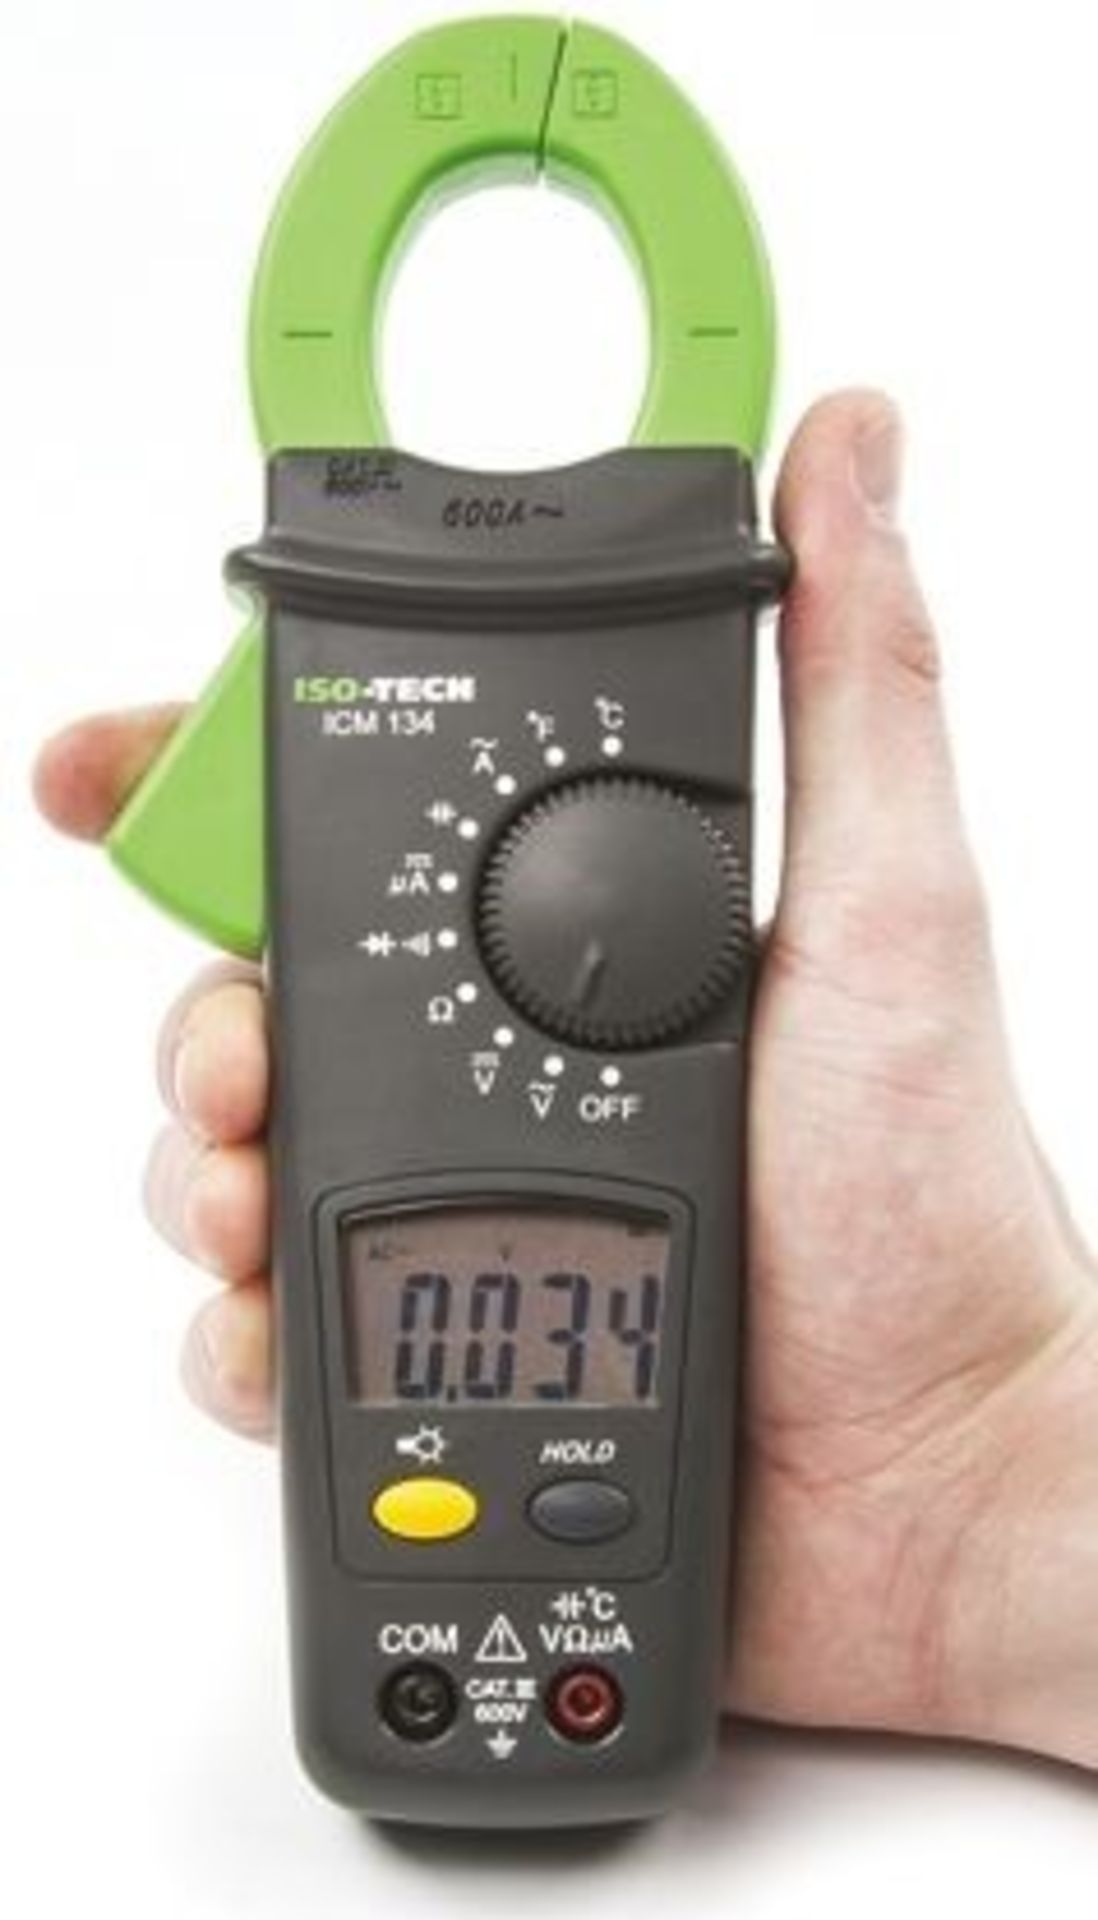 ISO-TECH ICM134 HVAC Clamp Meter, Max Current 600A ac CAT III 600 V - Image 2 of 3